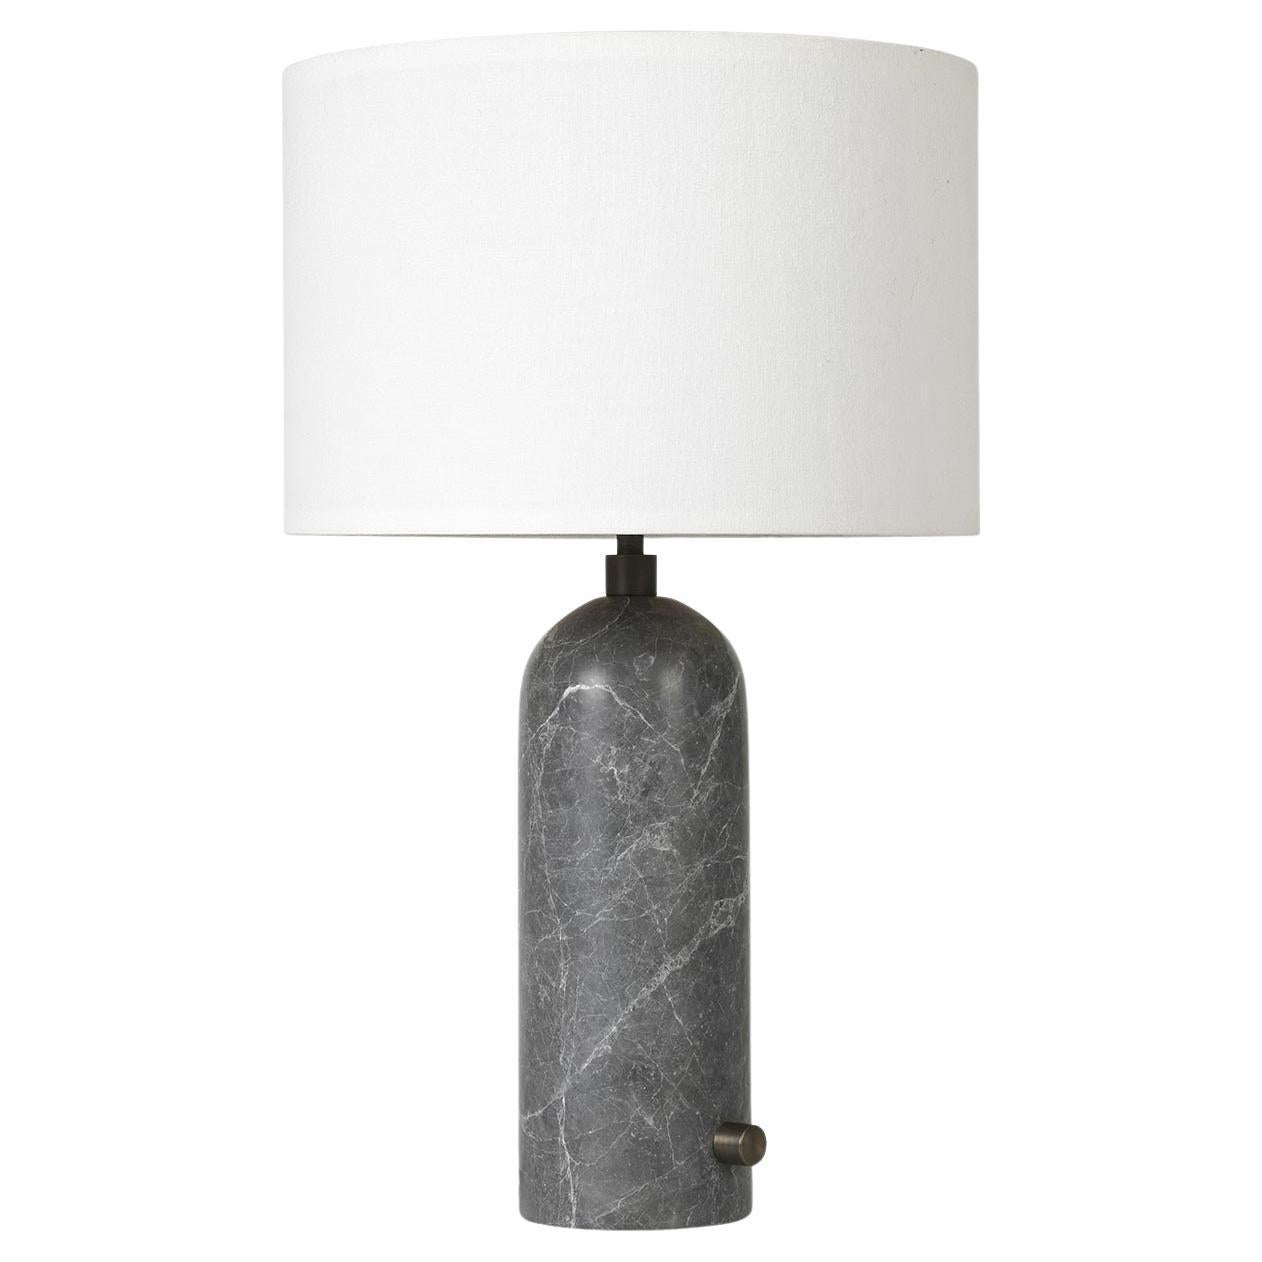 Gravity Table Lamp - Small, Grey Marble, White. For Sale